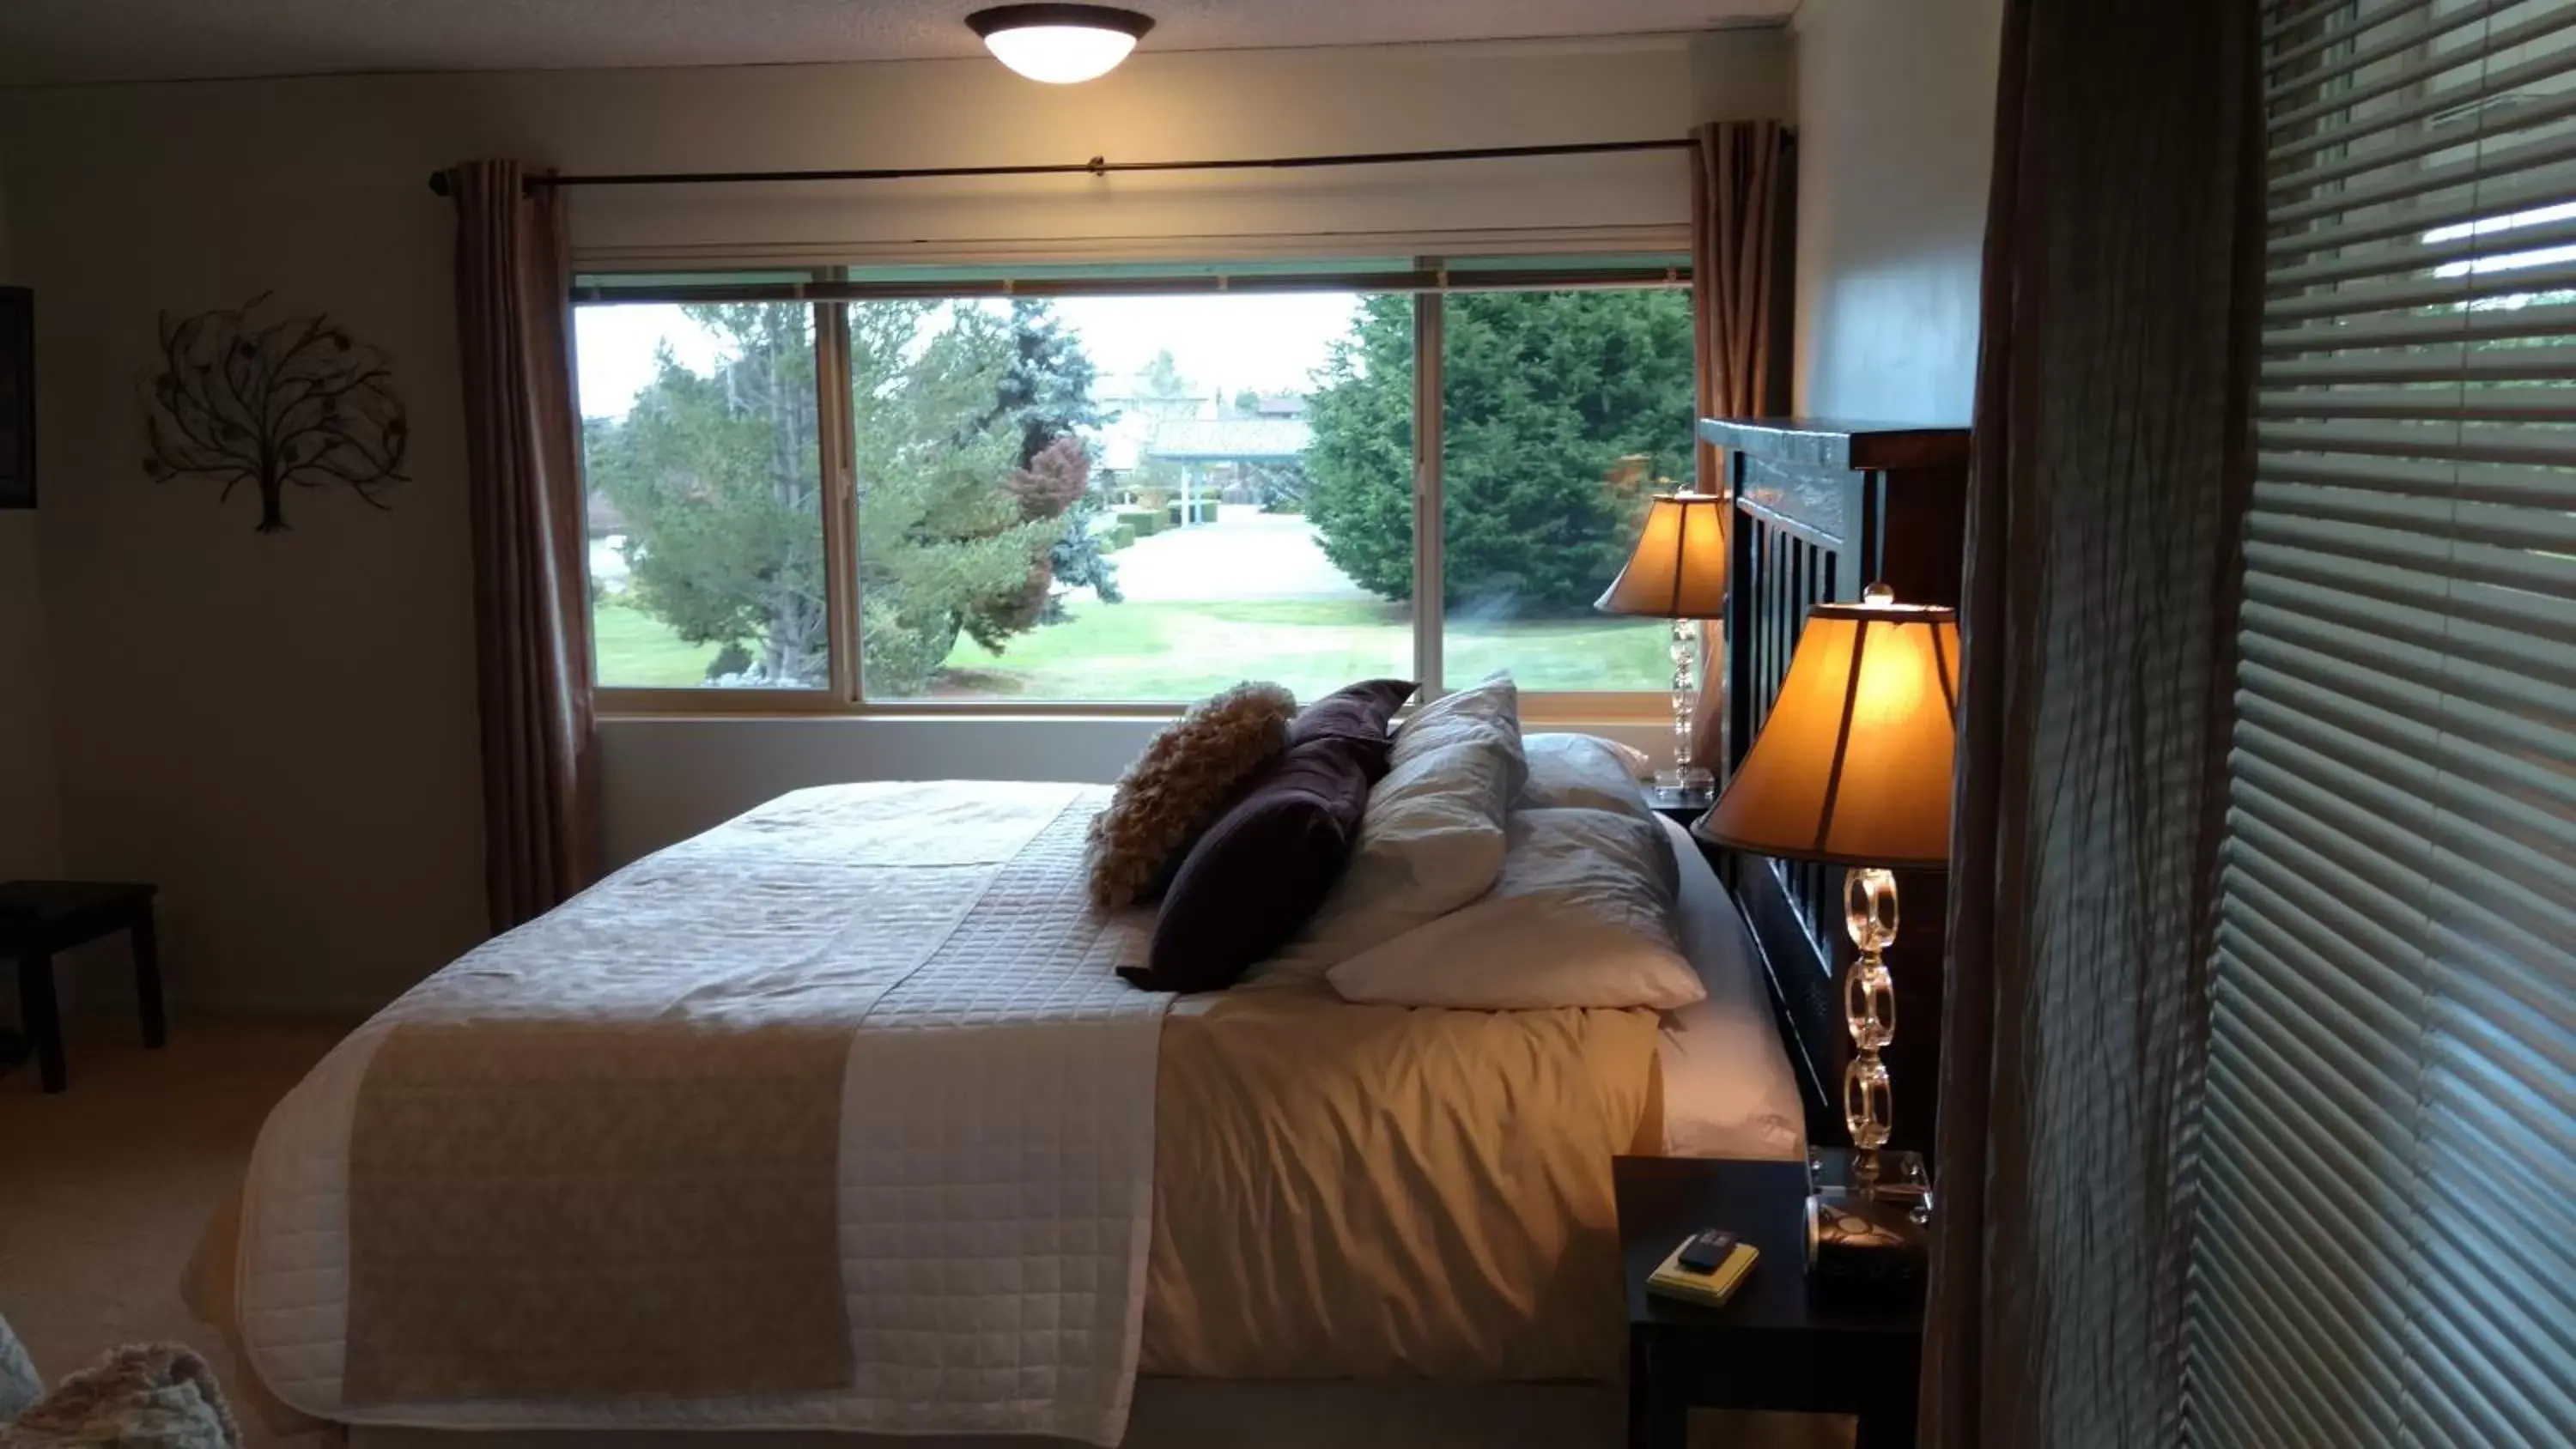 Bed, View in Greenhouse Inn by the Bay